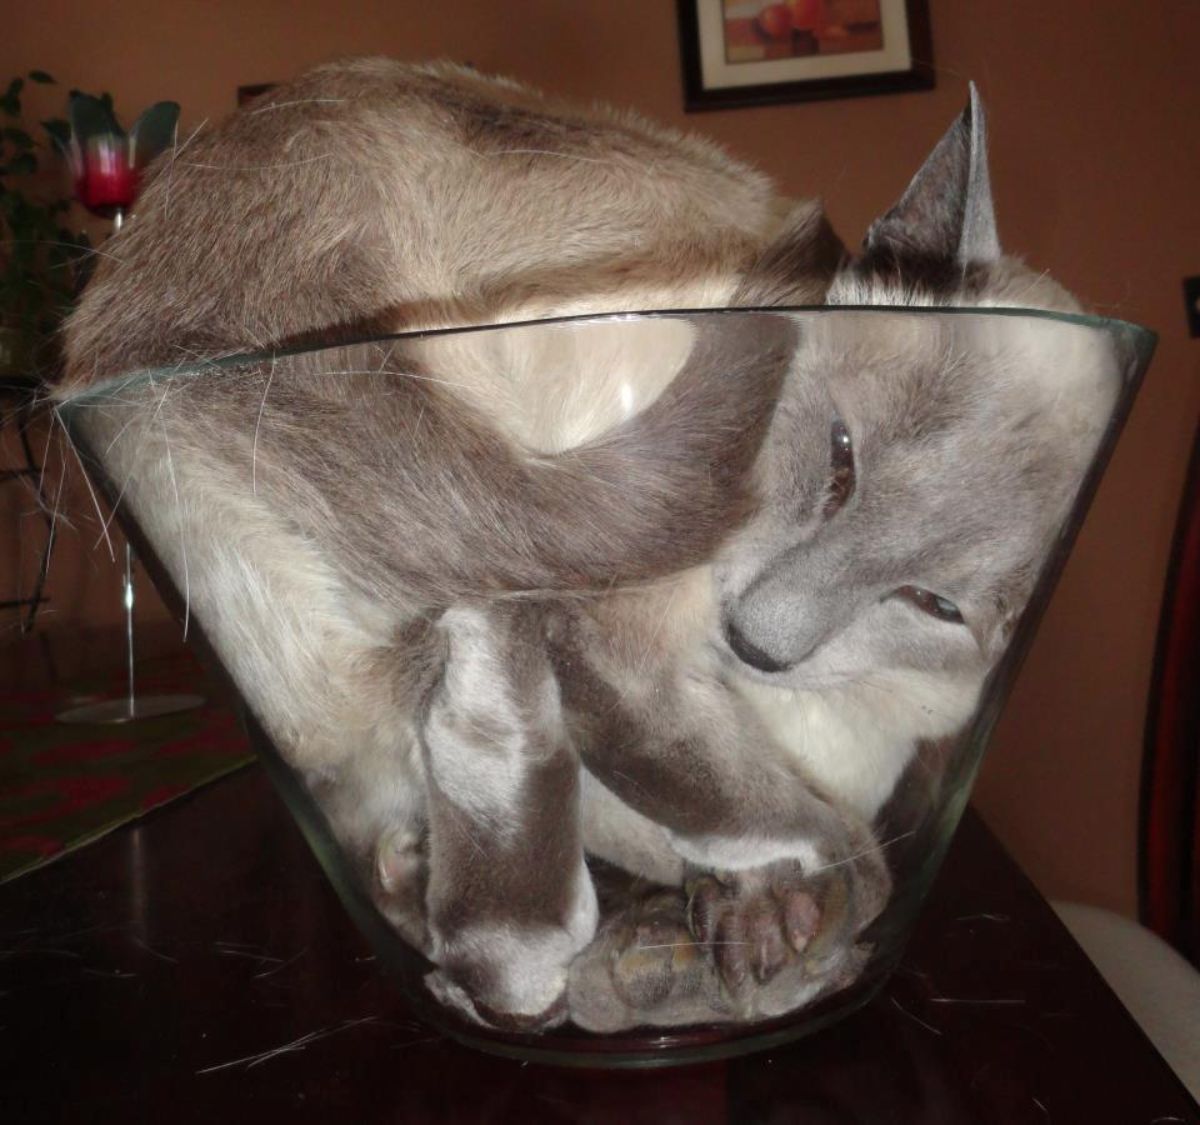 grey brown and white cat laying inside a glass bowl